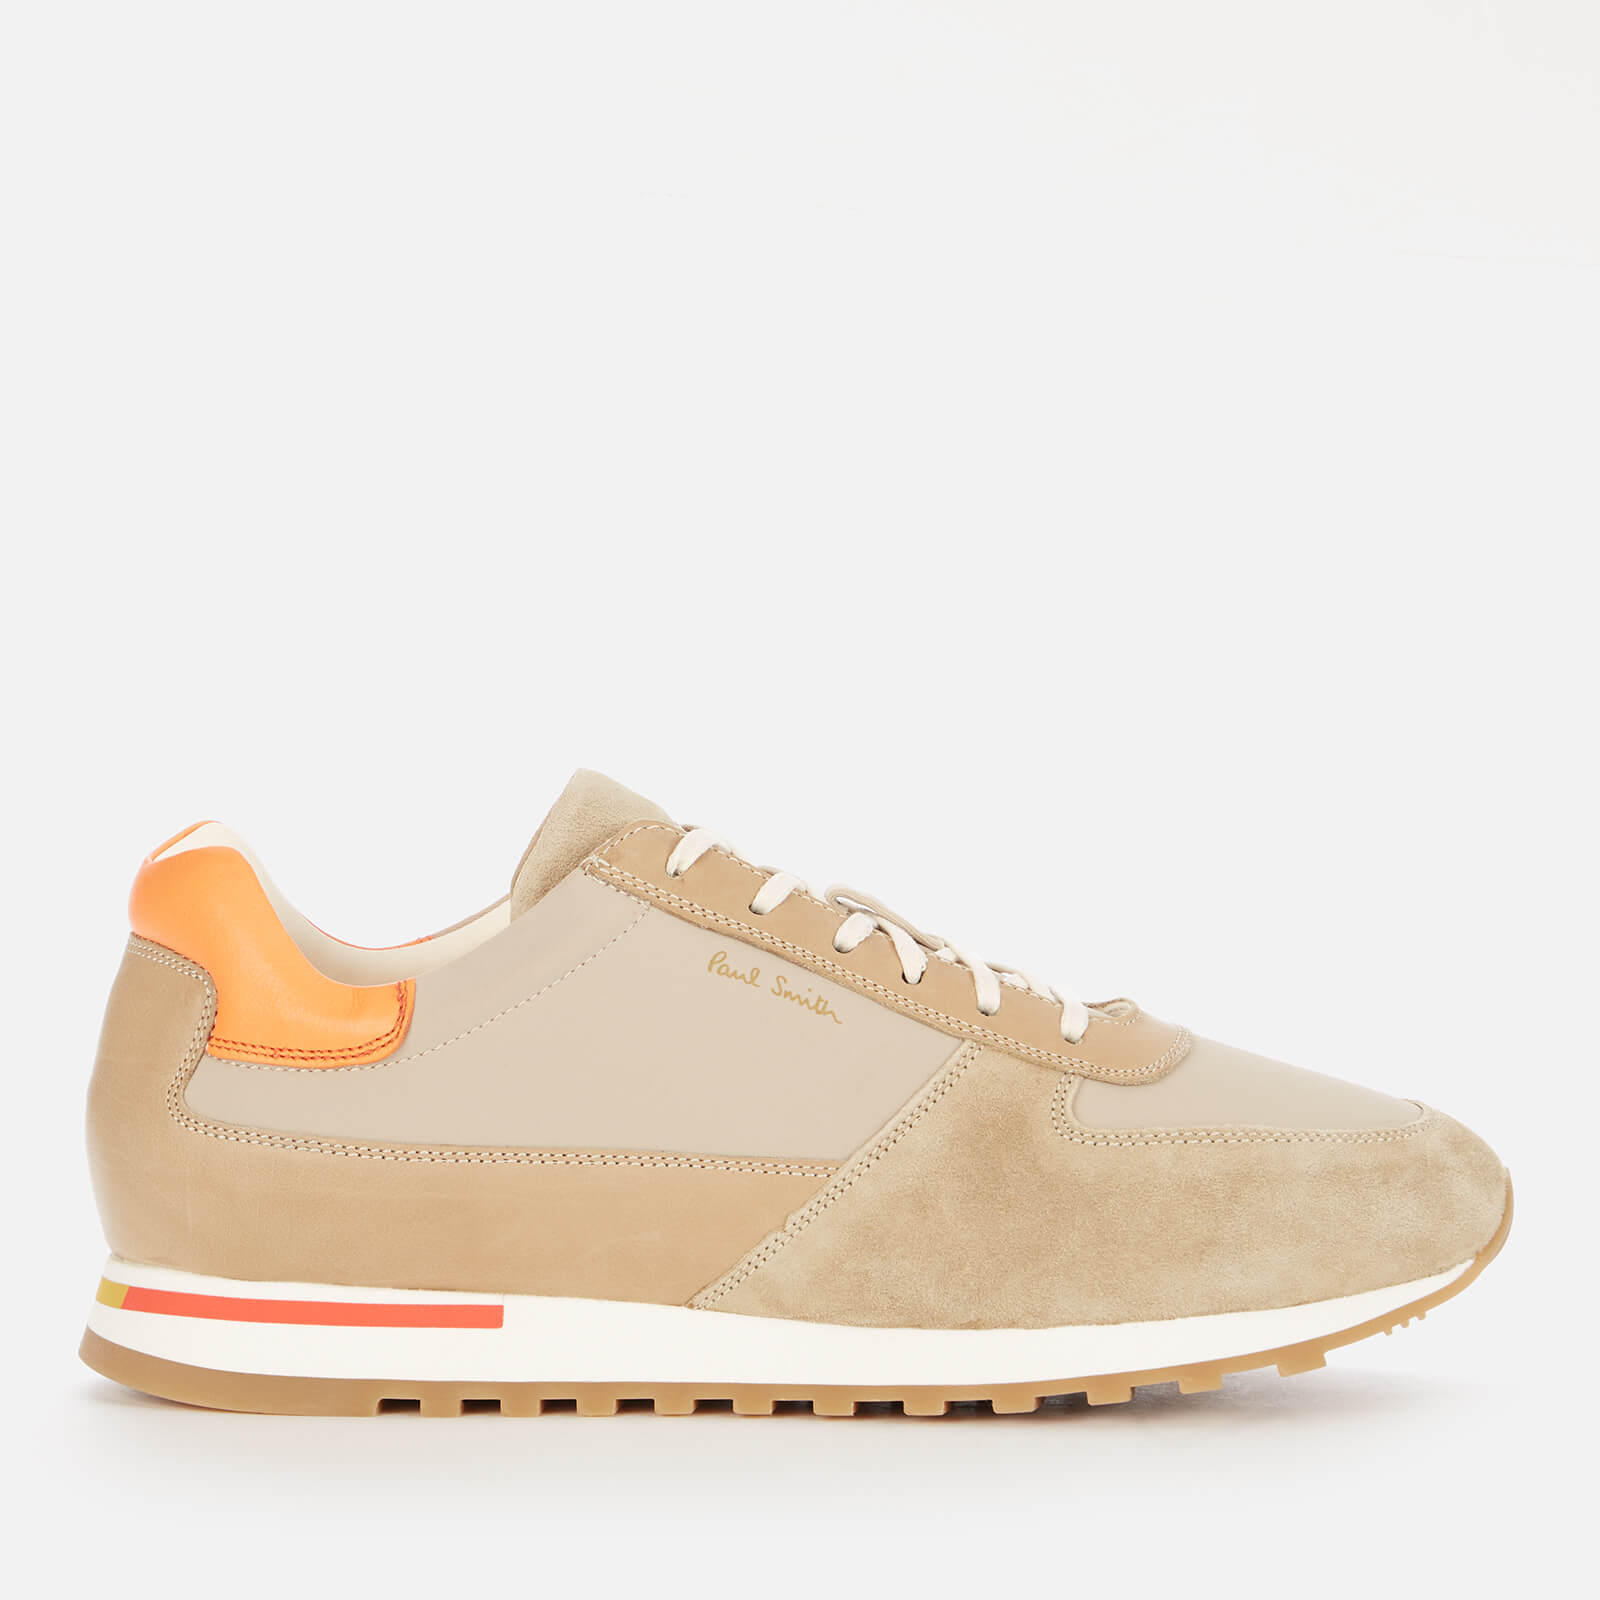 Paul Smith Men's Velo Leather Running Style Trainers - Sand - UK 7